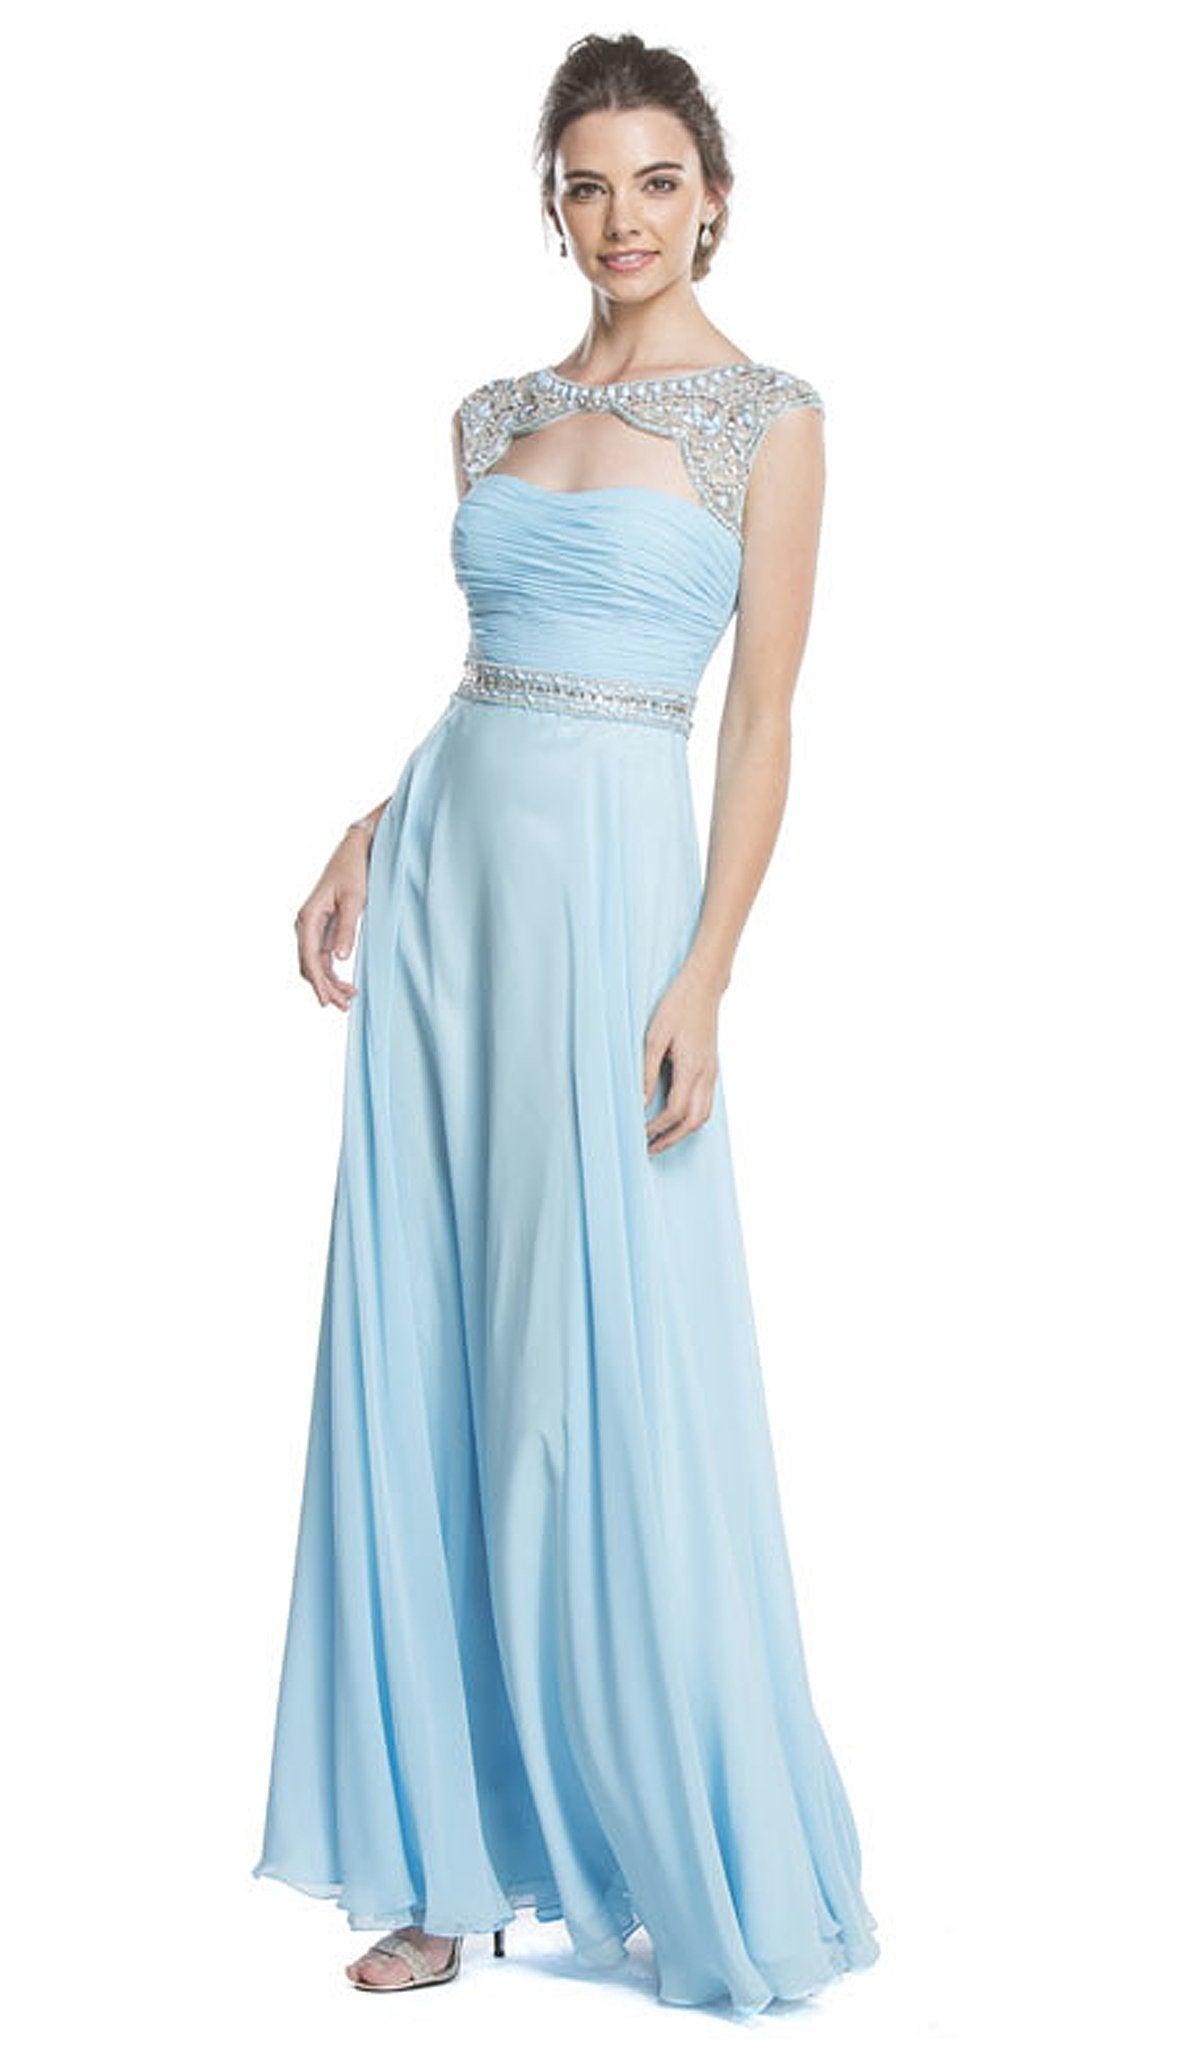 Aspeed Design - Beaded Ruched A-Line Evening Dress
